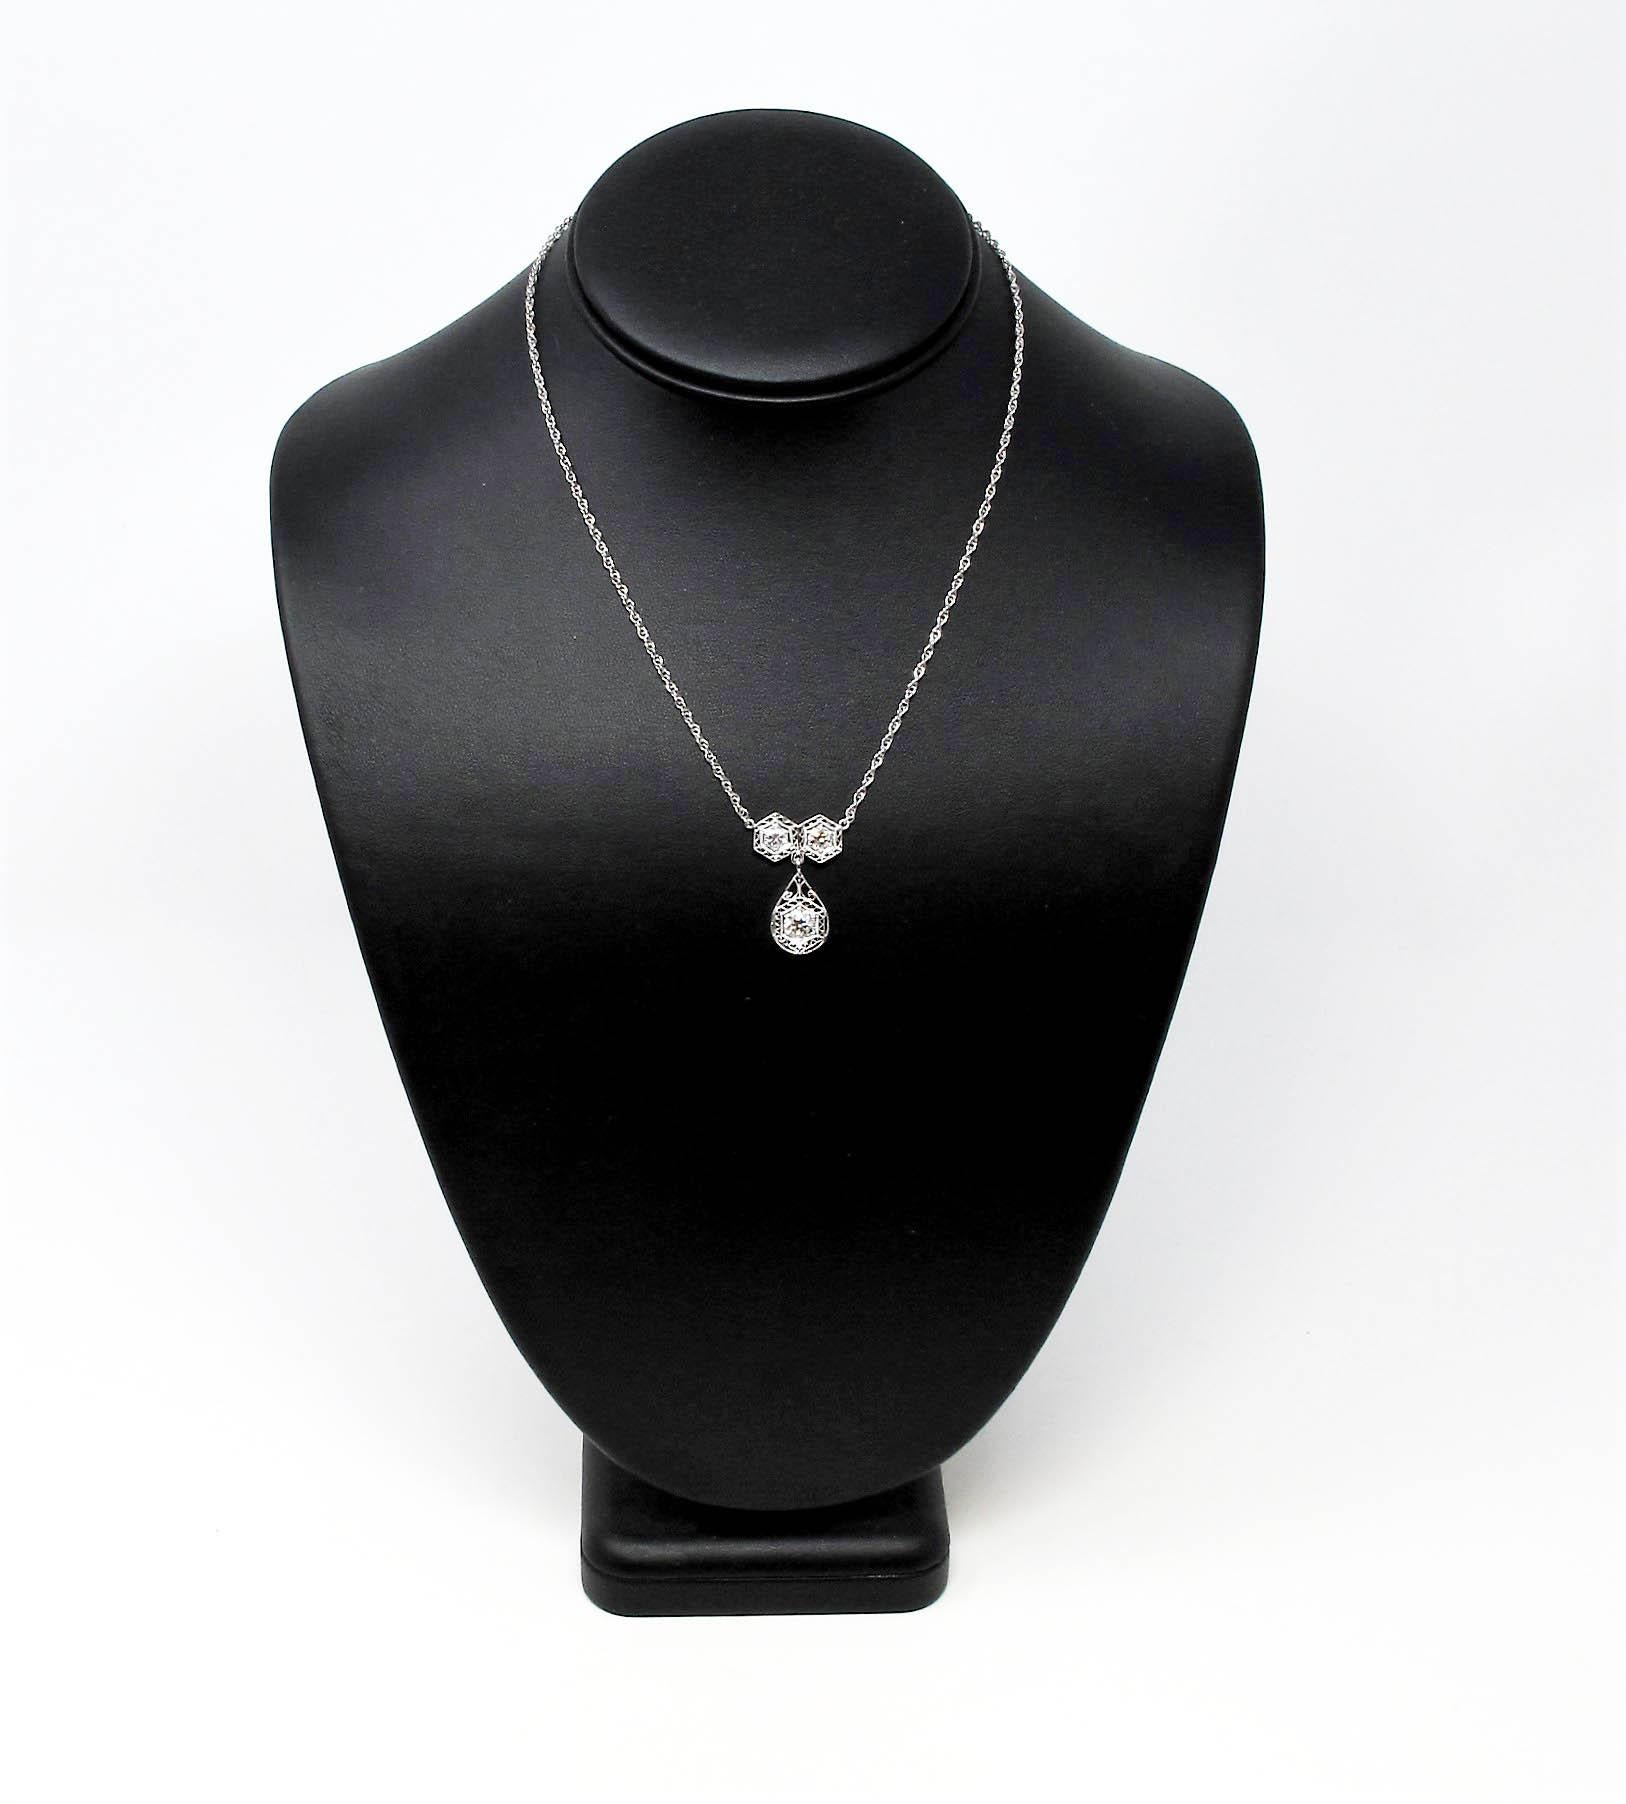 Incredible vintage diamond necklace bursting with Old World charm. This gorgeous piece boasts a simple yet elegant design, elevated by the intricate filigree detailing that really enhance the stunning Old European cut diamonds. This necklace is a